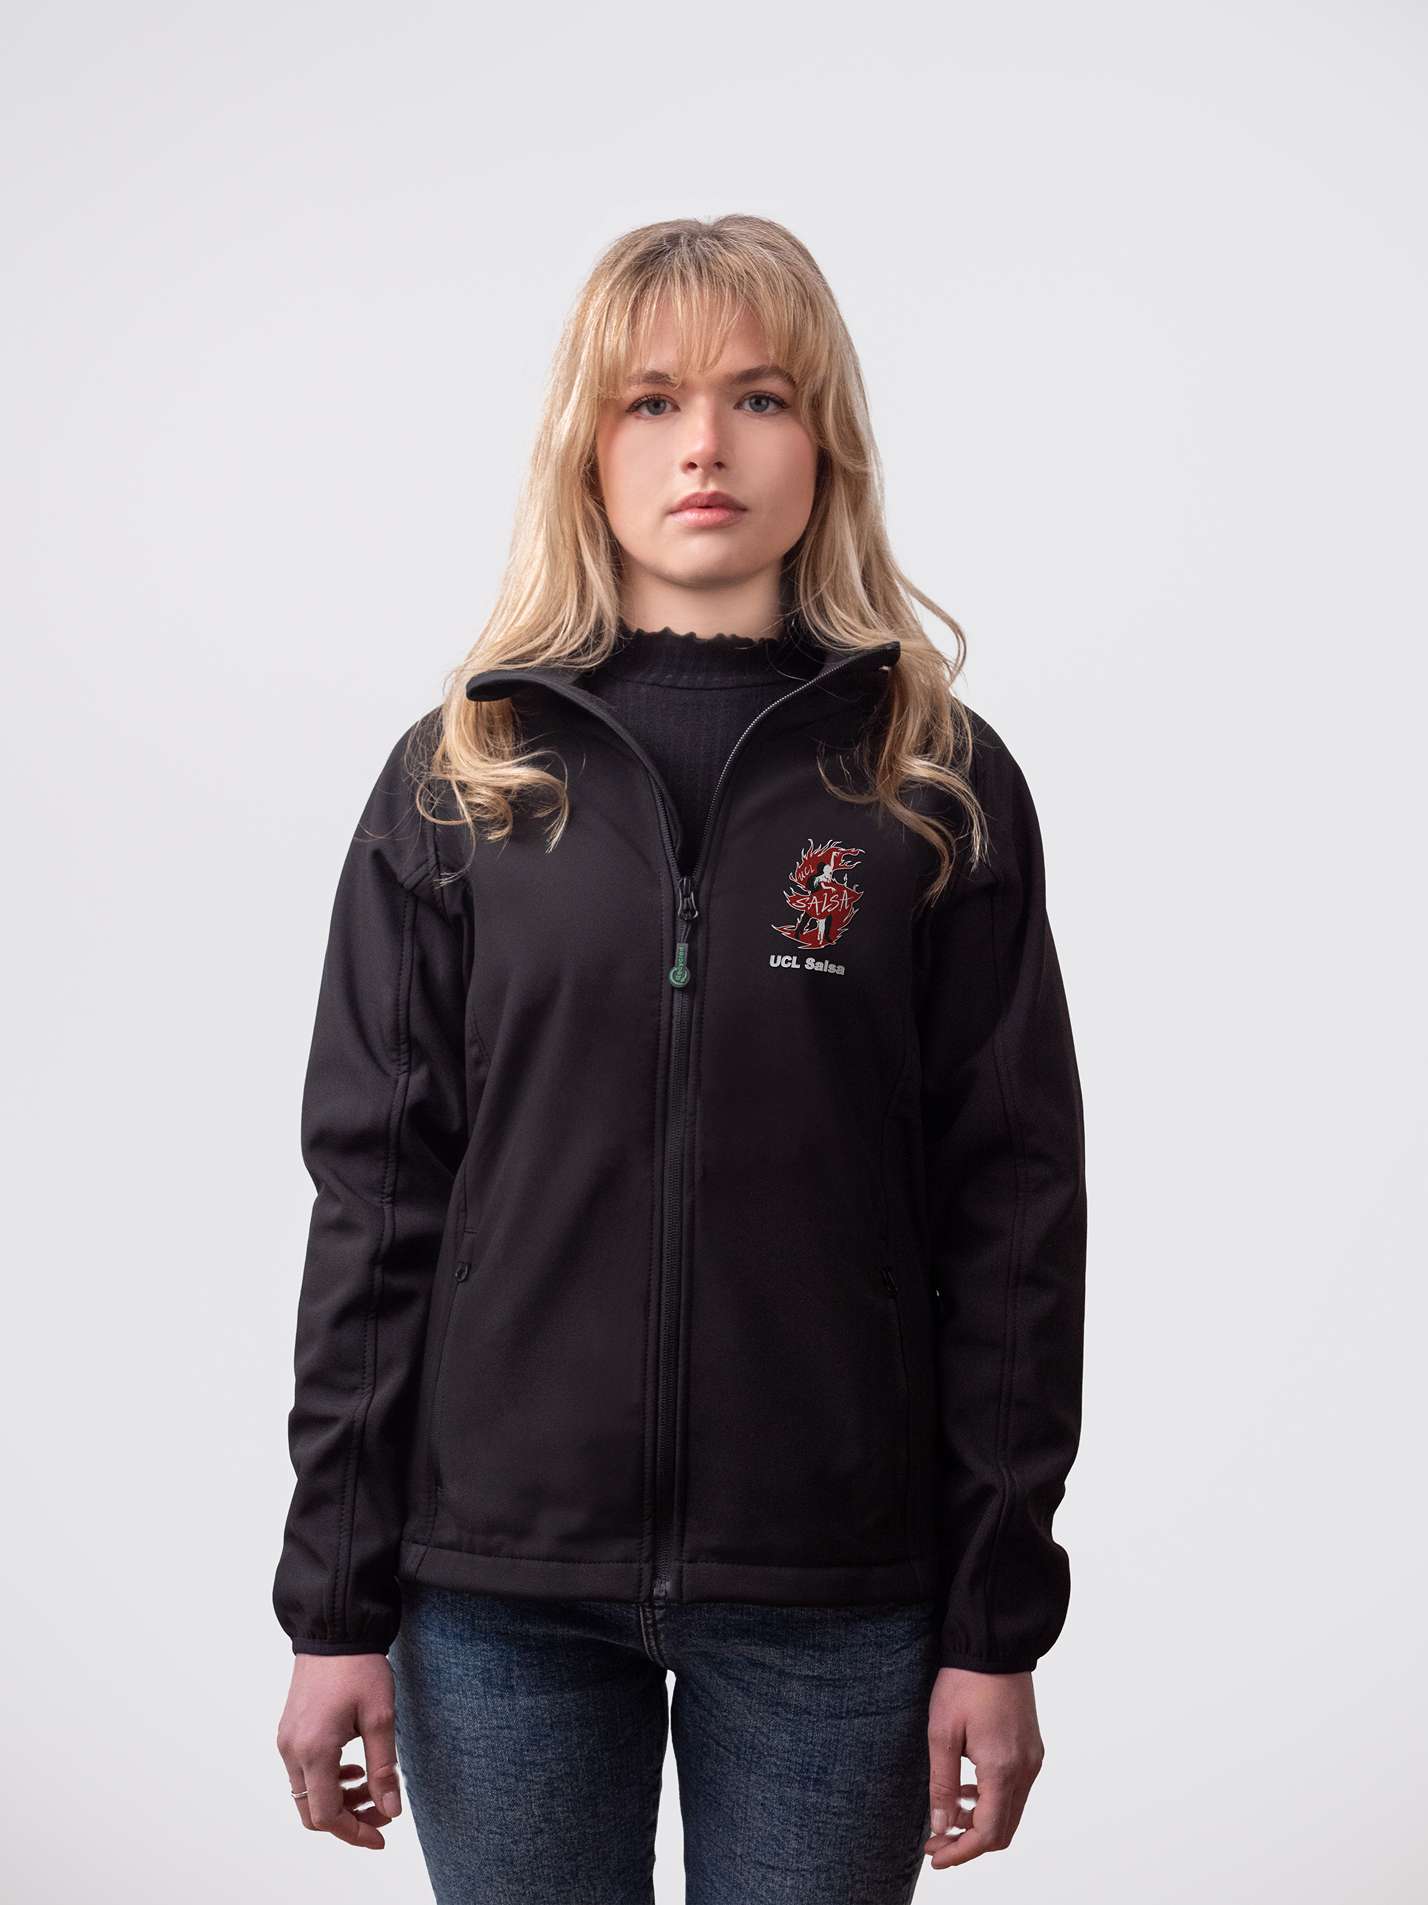 UCL Salsa Sustainable Ladies Soft Shell Jacket